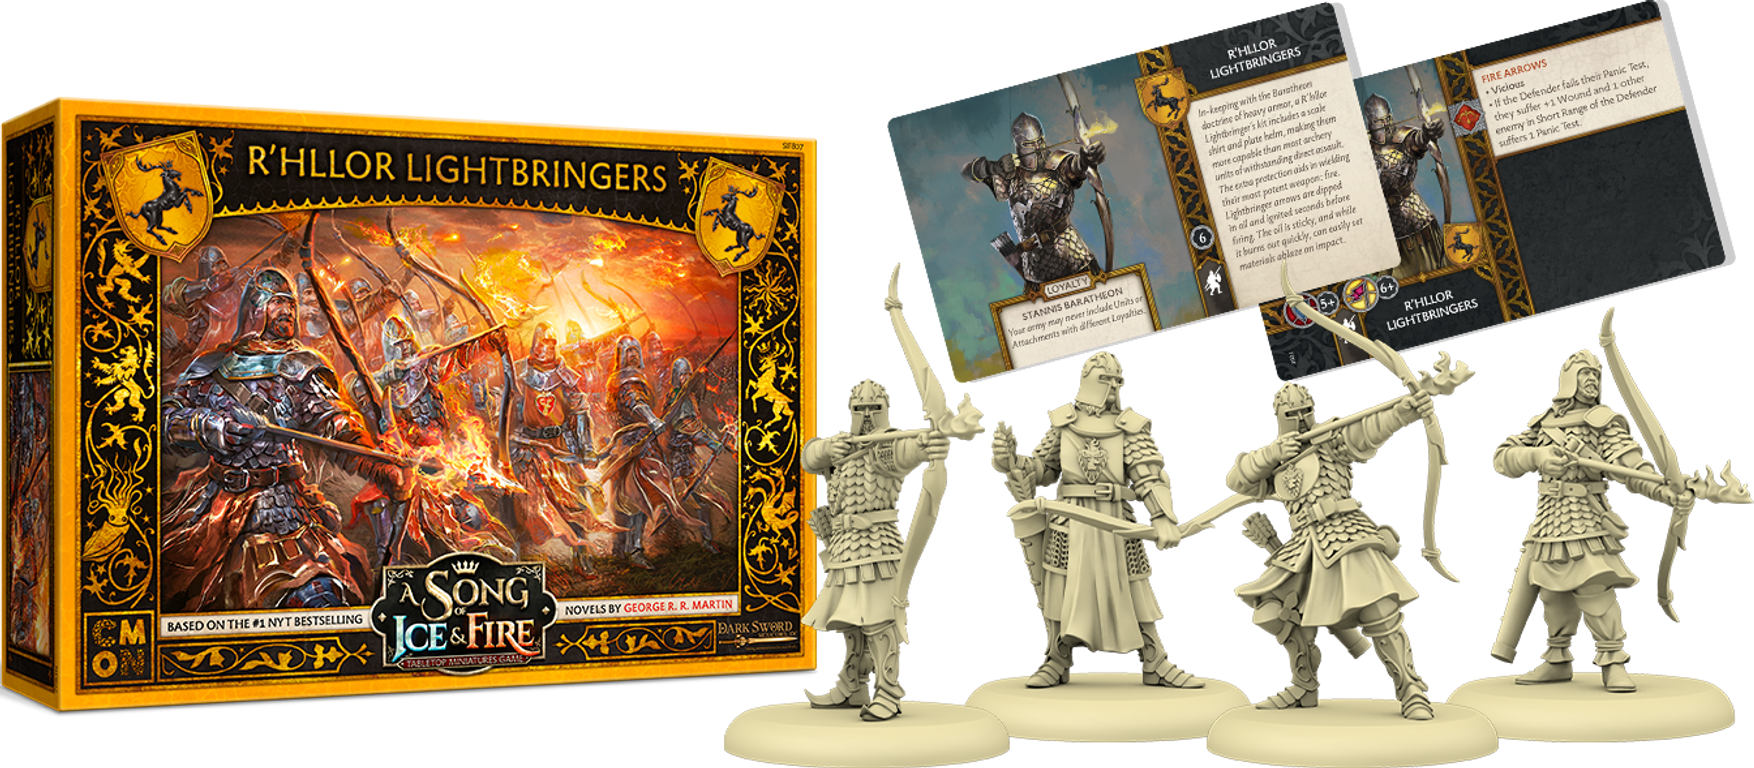 A Song of Ice & Fire: Tabletop Miniatures Game – R'hllor Lightbringers components